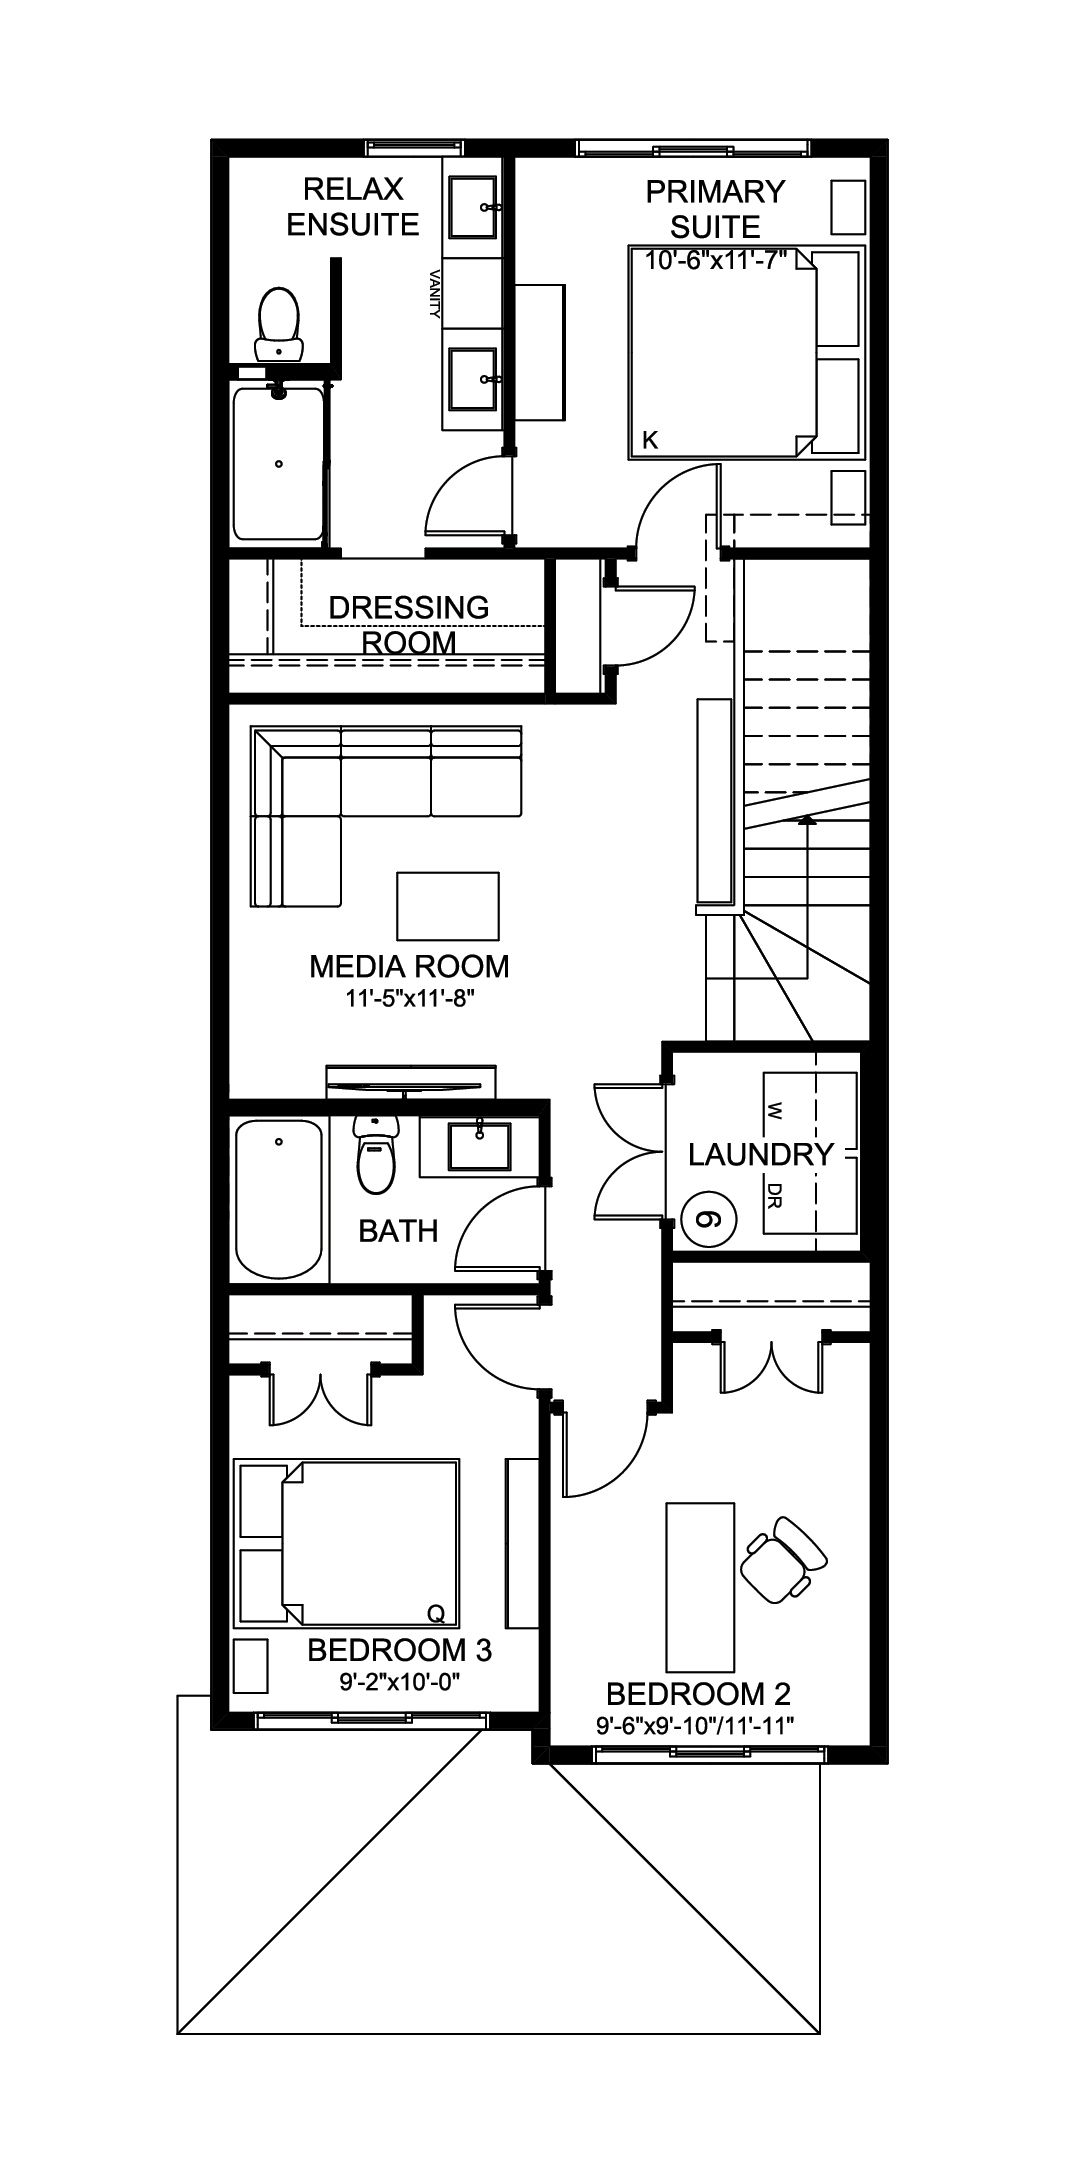 Career Strive 20 Floor Plan of The Hills at Charlesworth Cantiro Homes with undefined beds